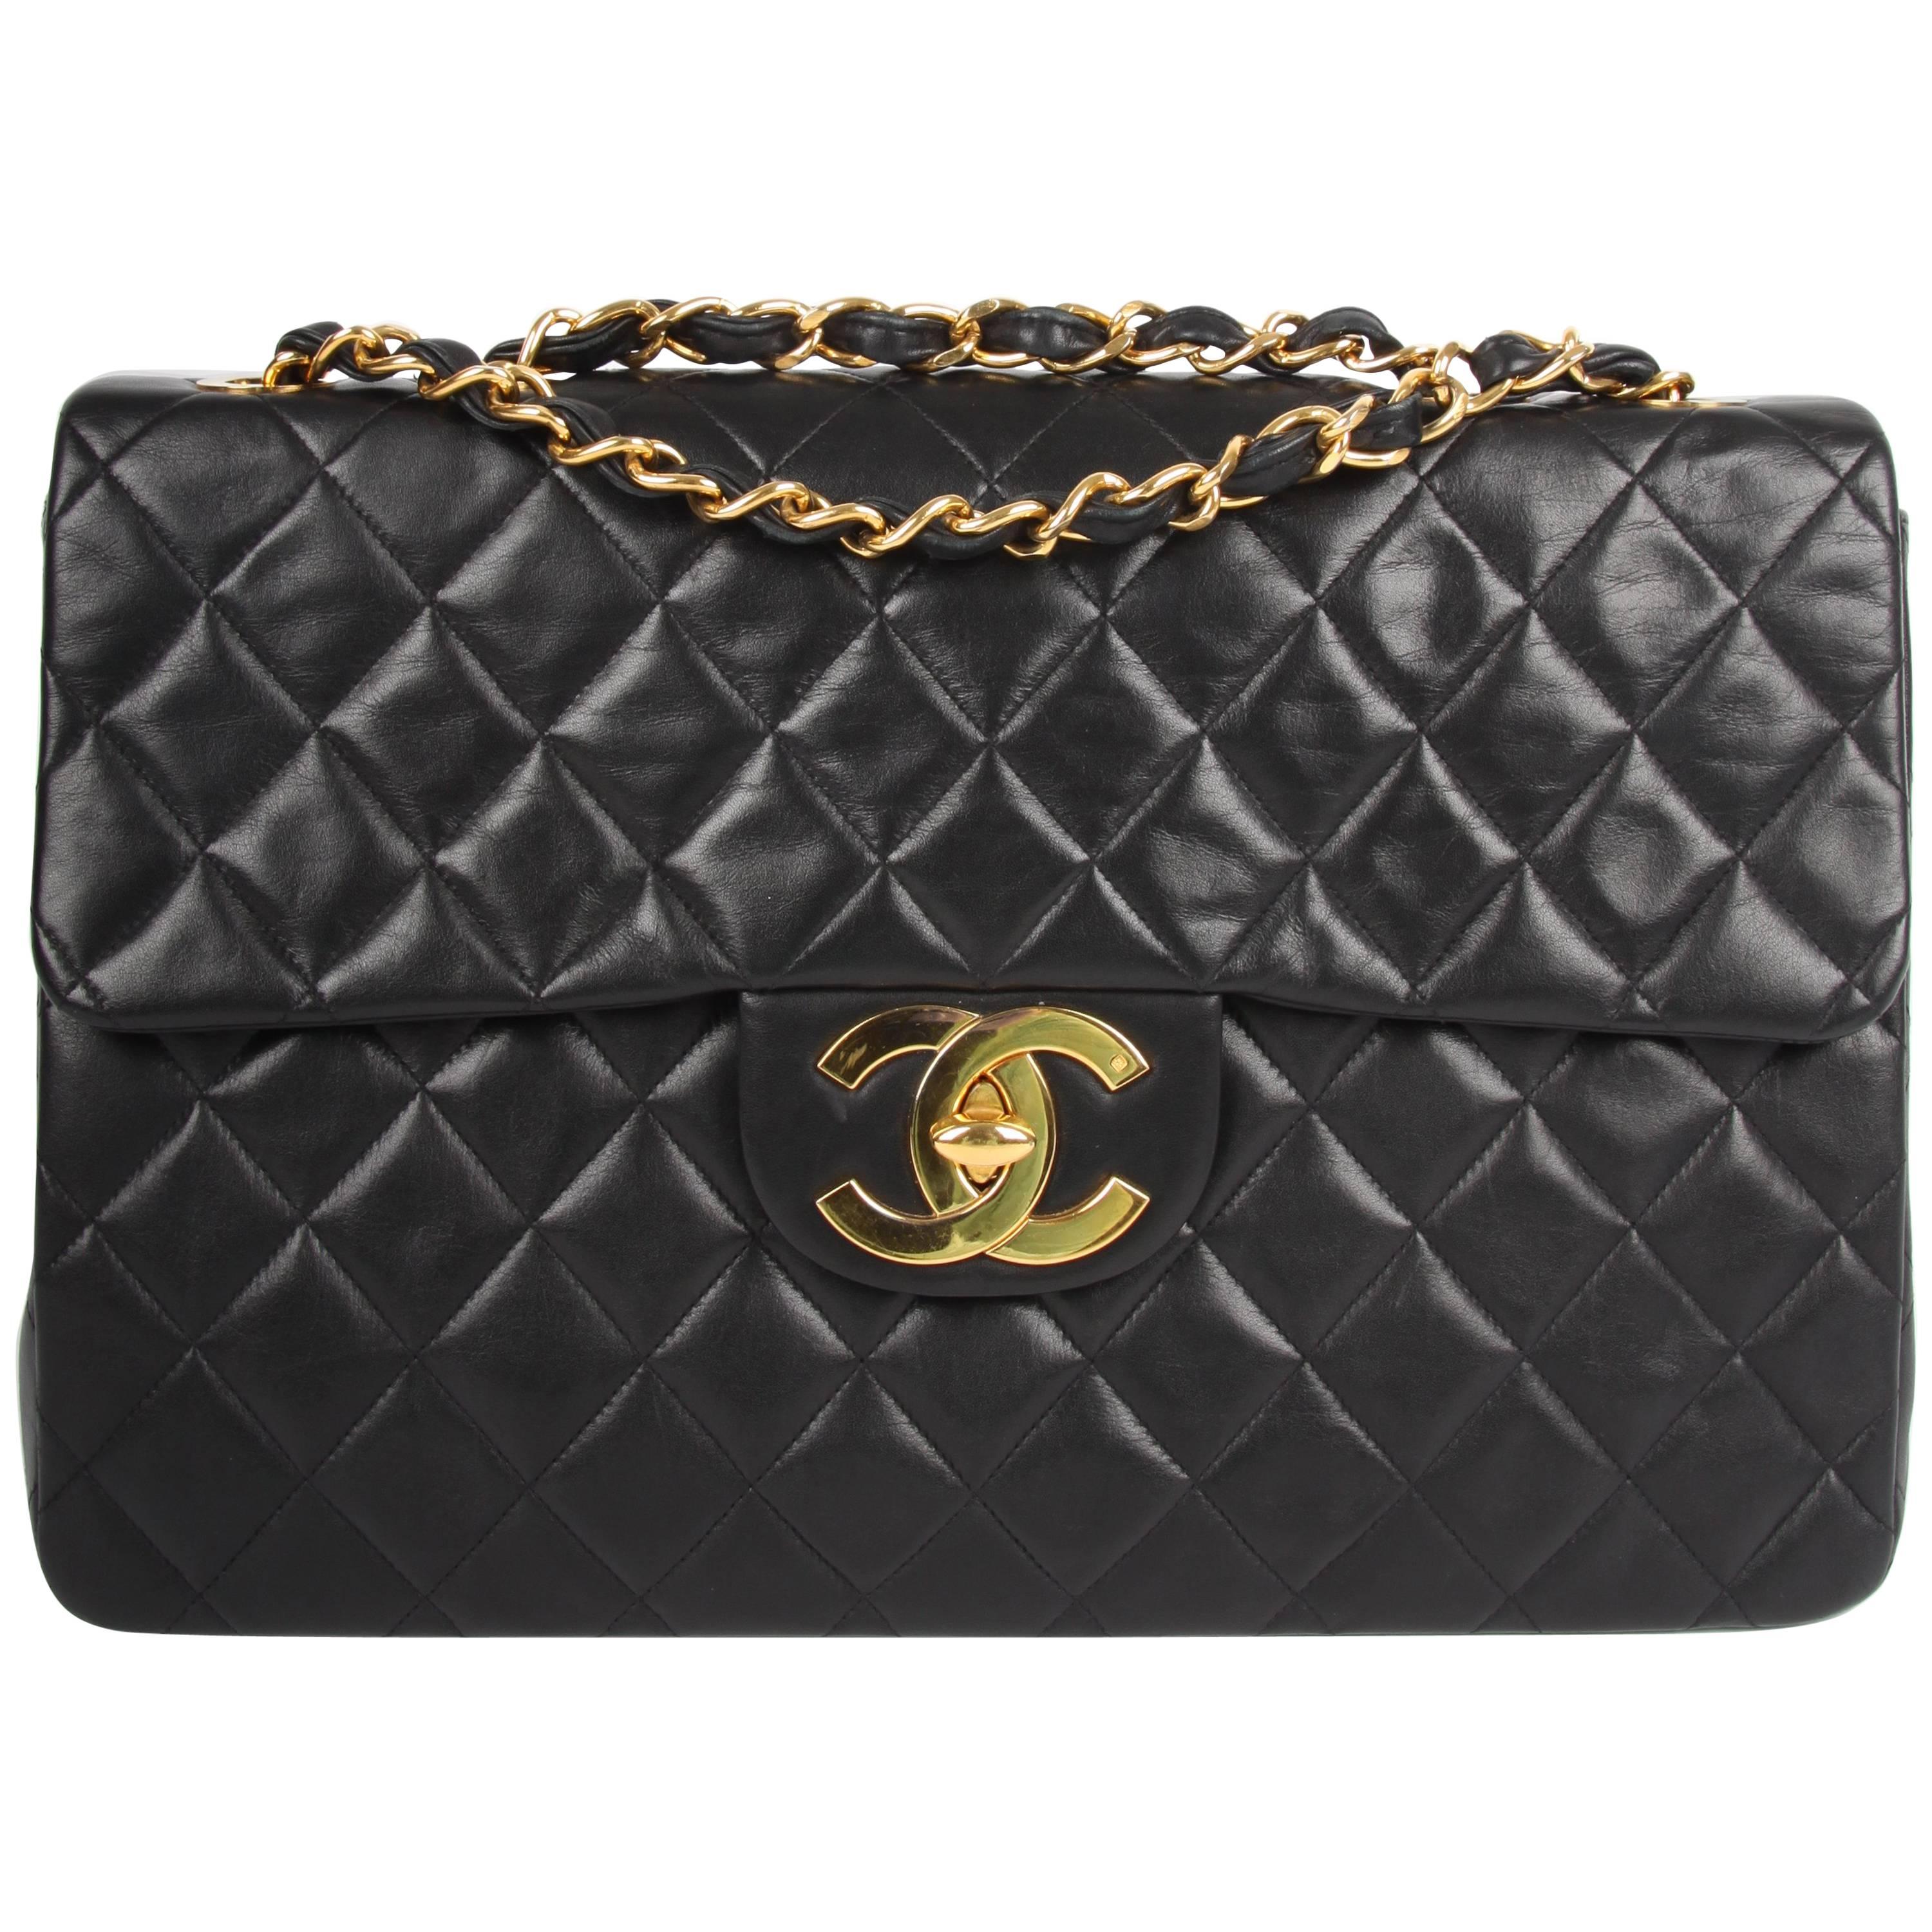 Chanel 2.55 Timeless Maxi Single Flap Bag - black leather For Sale